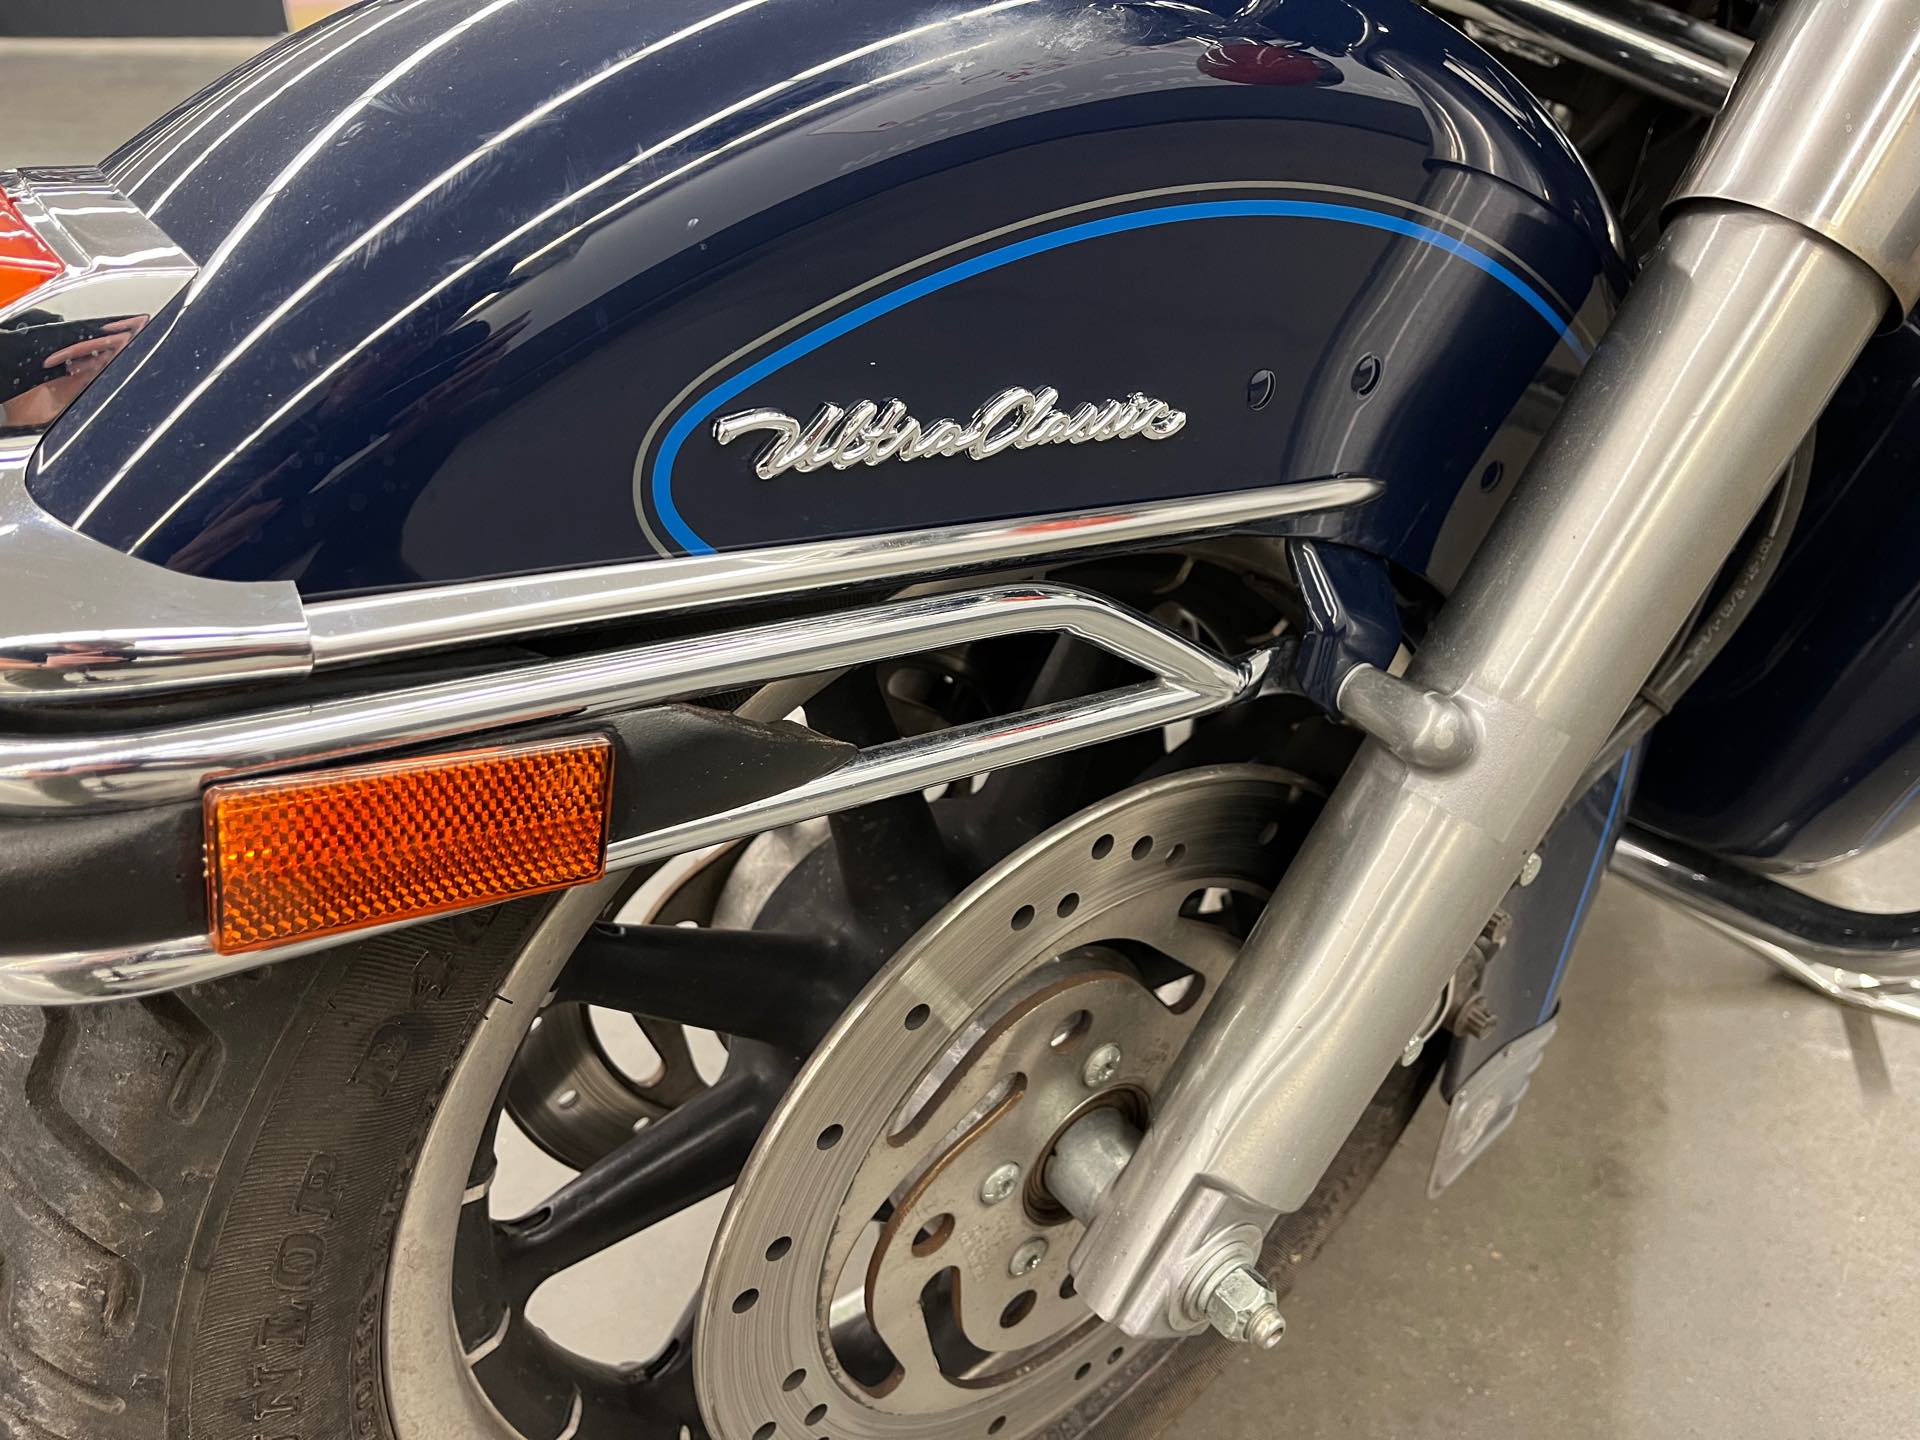 2004 Harley-Davidson Electra Glide Ultra Classic at Aces Motorcycles - Denver